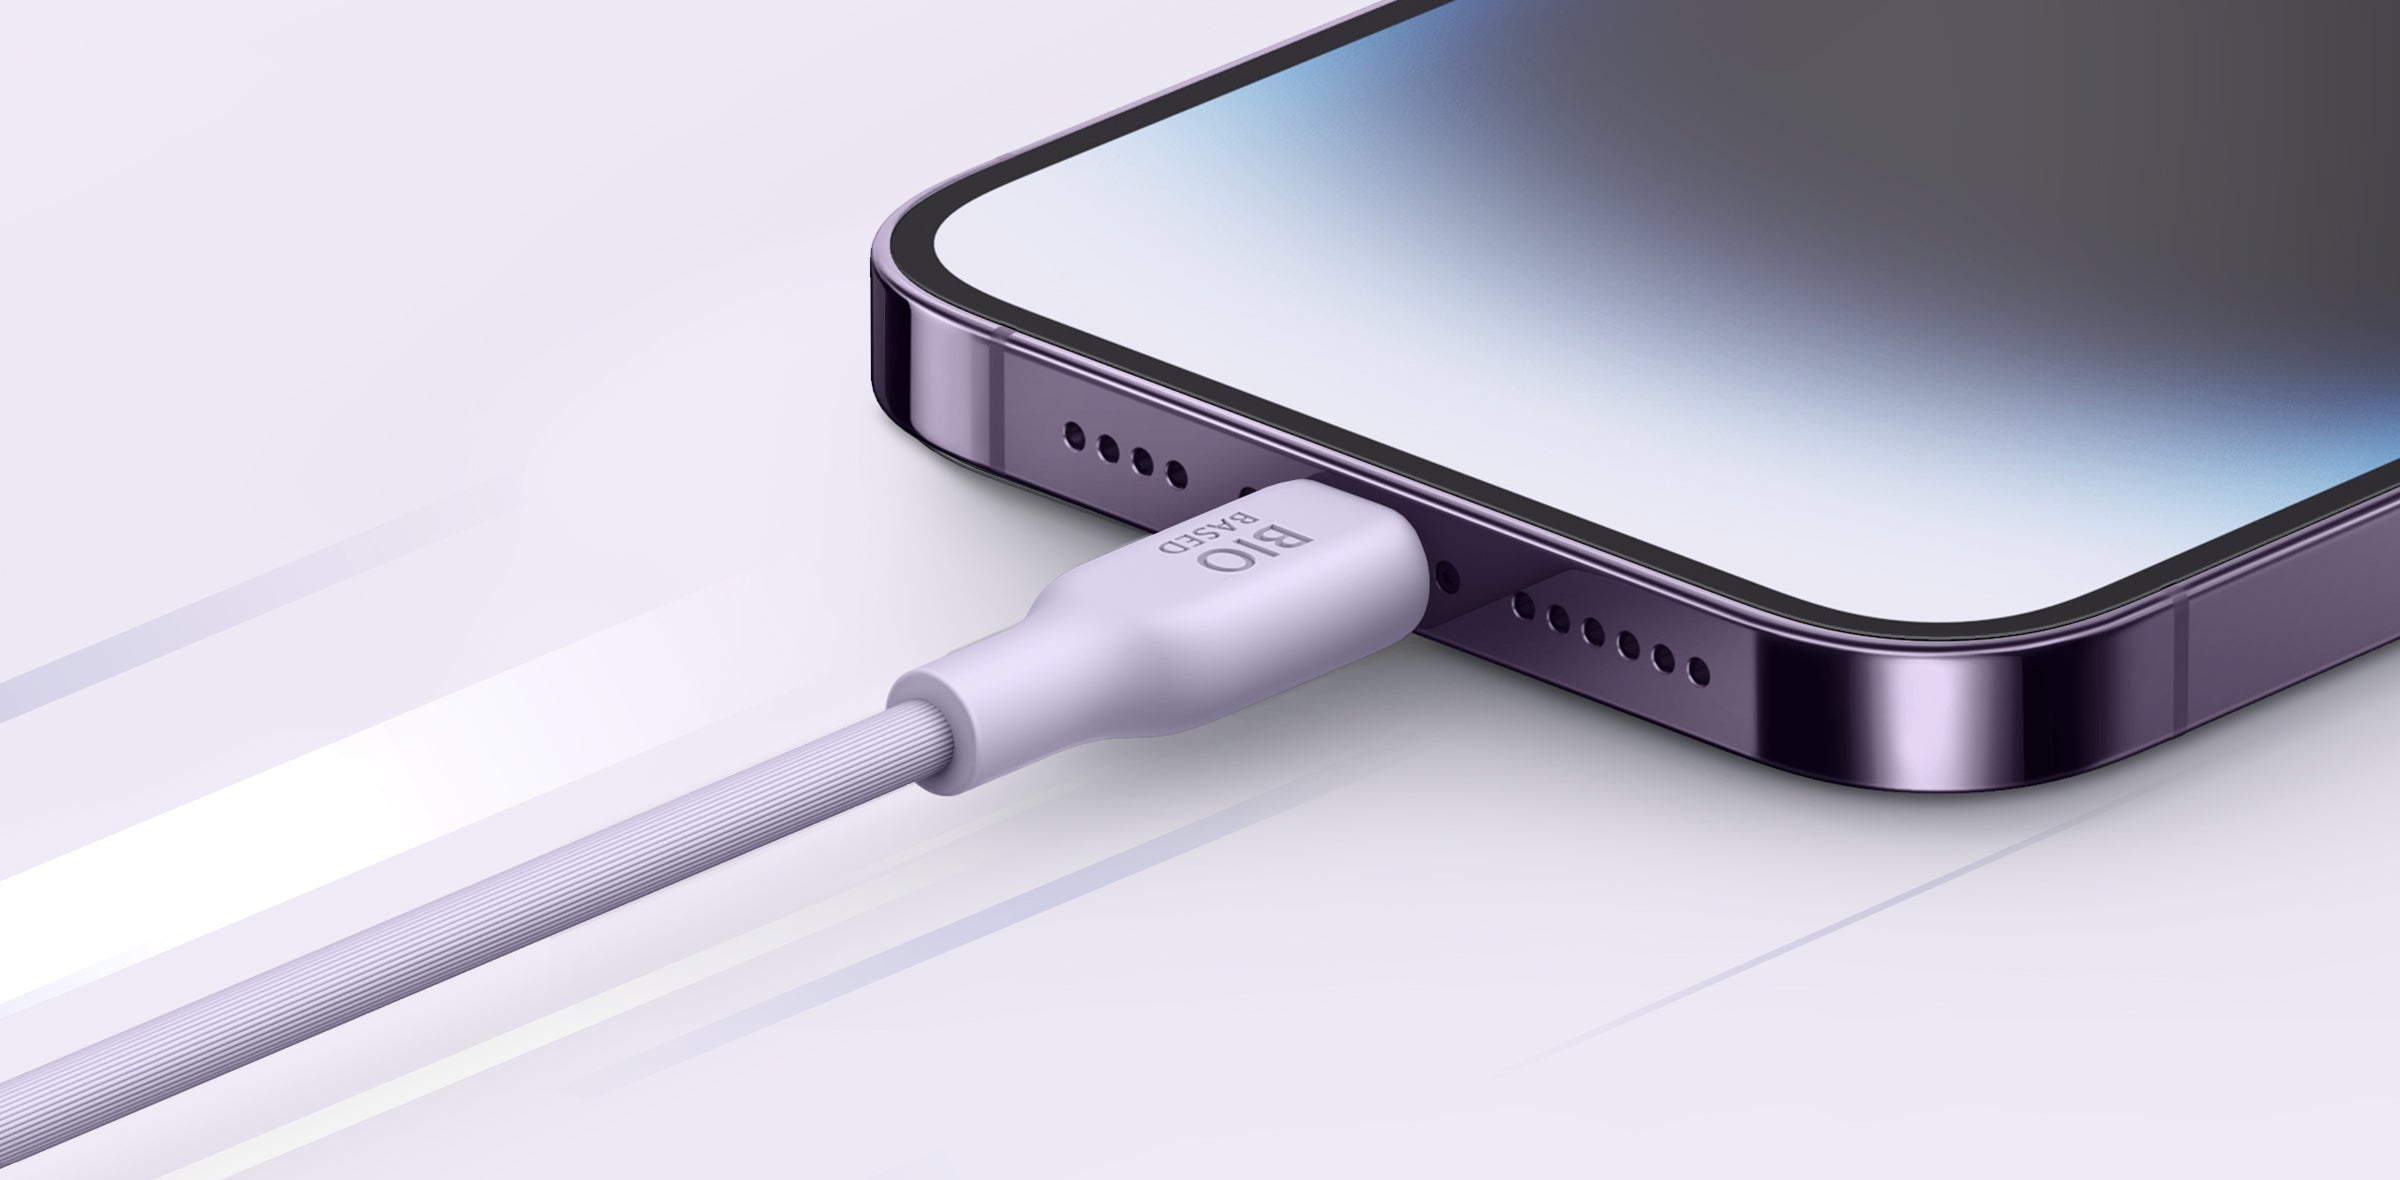 Full-Speed Charging for Your iPhone